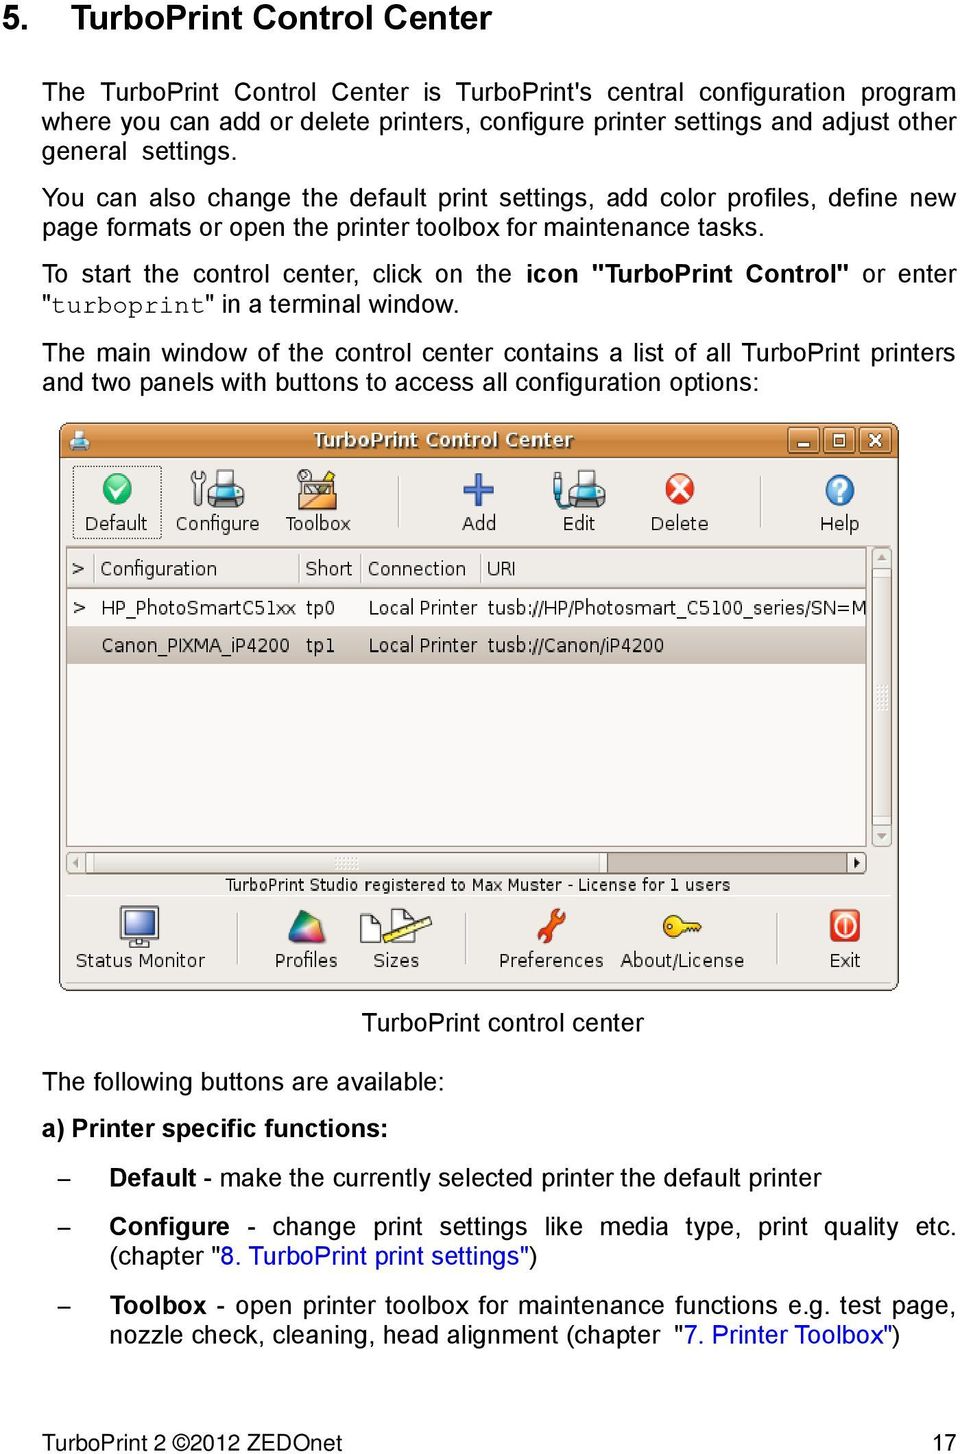 To start the control center, click on the icon "TurboPrint Control" or enter "turboprint" in a terminal window.